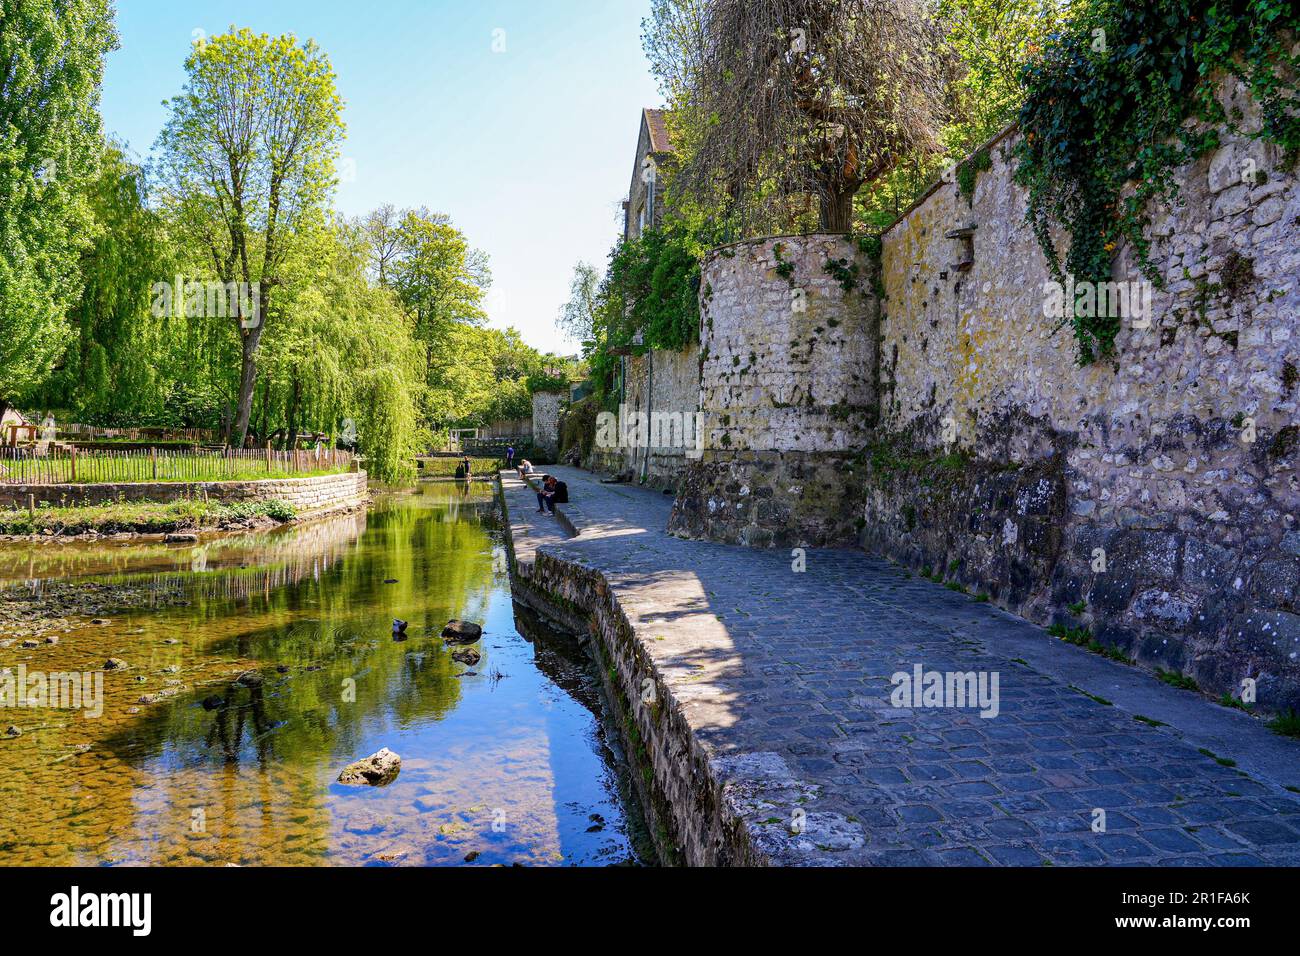 Riverside promenade in the medieval town of Moret-sur-Loing in Seine et Marne, France Stock Photo